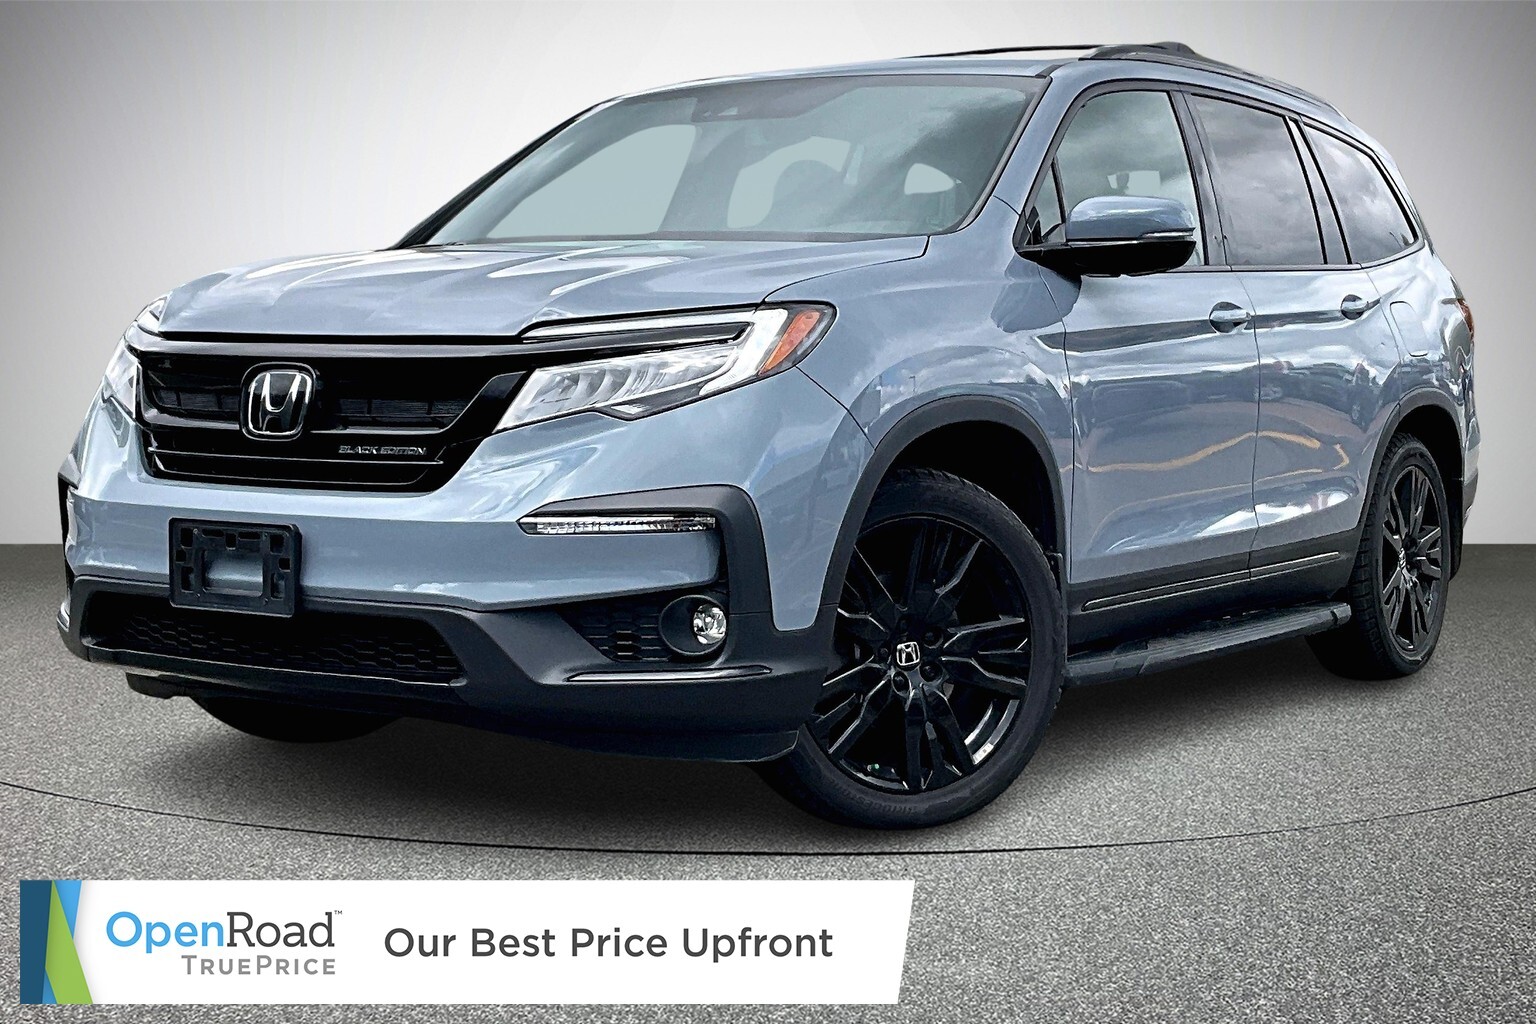 2022 Honda Pilot Black Edition - For as little as $373.45 bi-weekly